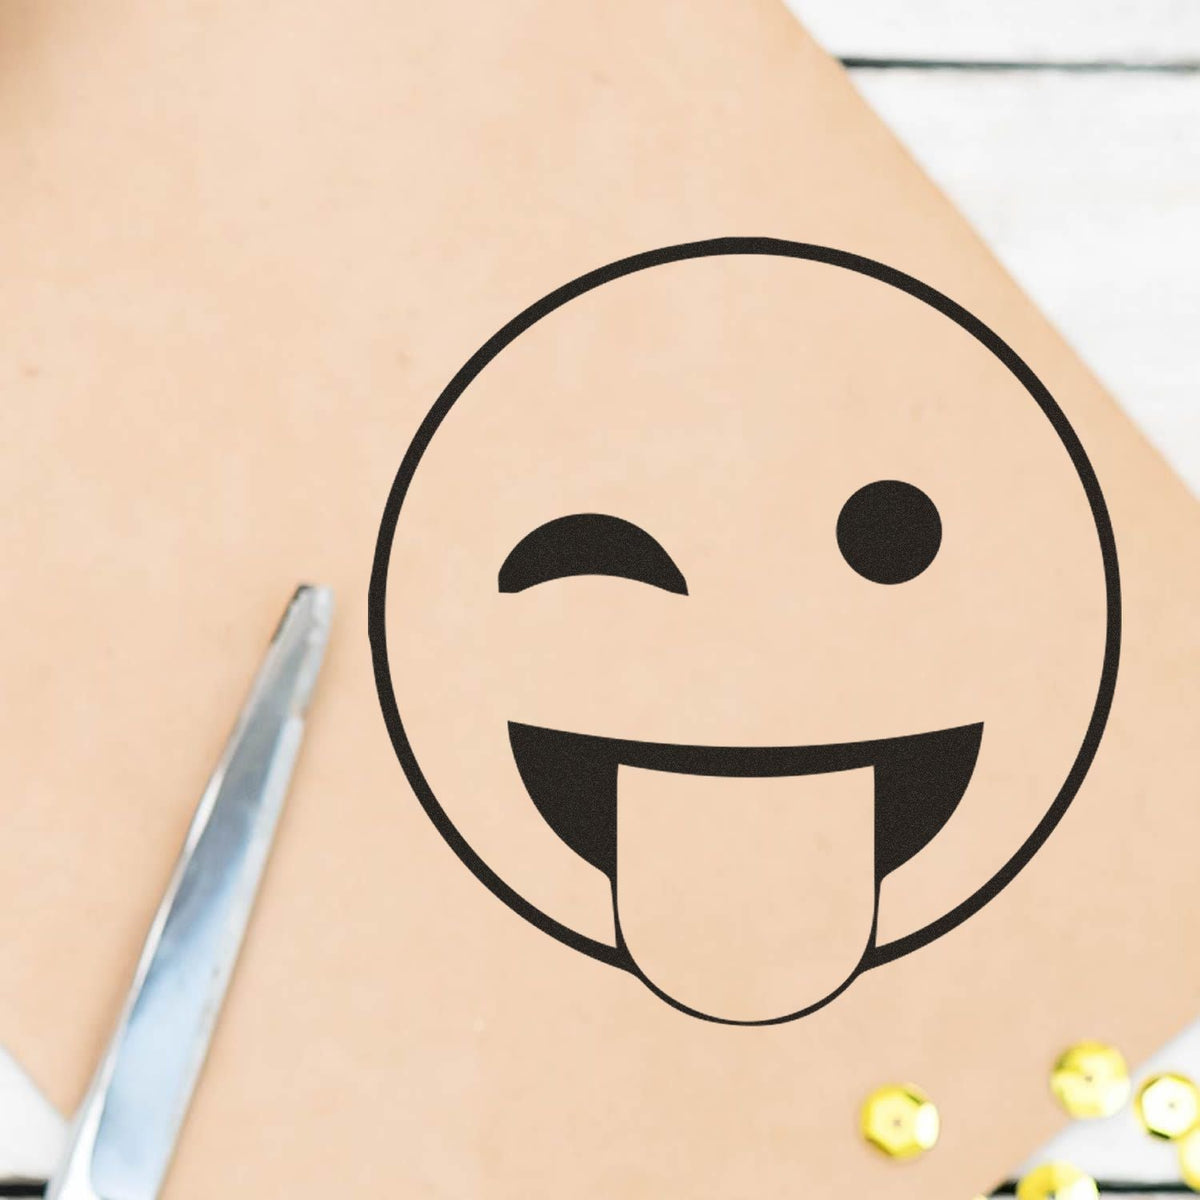 Self-Inking Round Tongue out smiley Stamp Lifestyle Photo